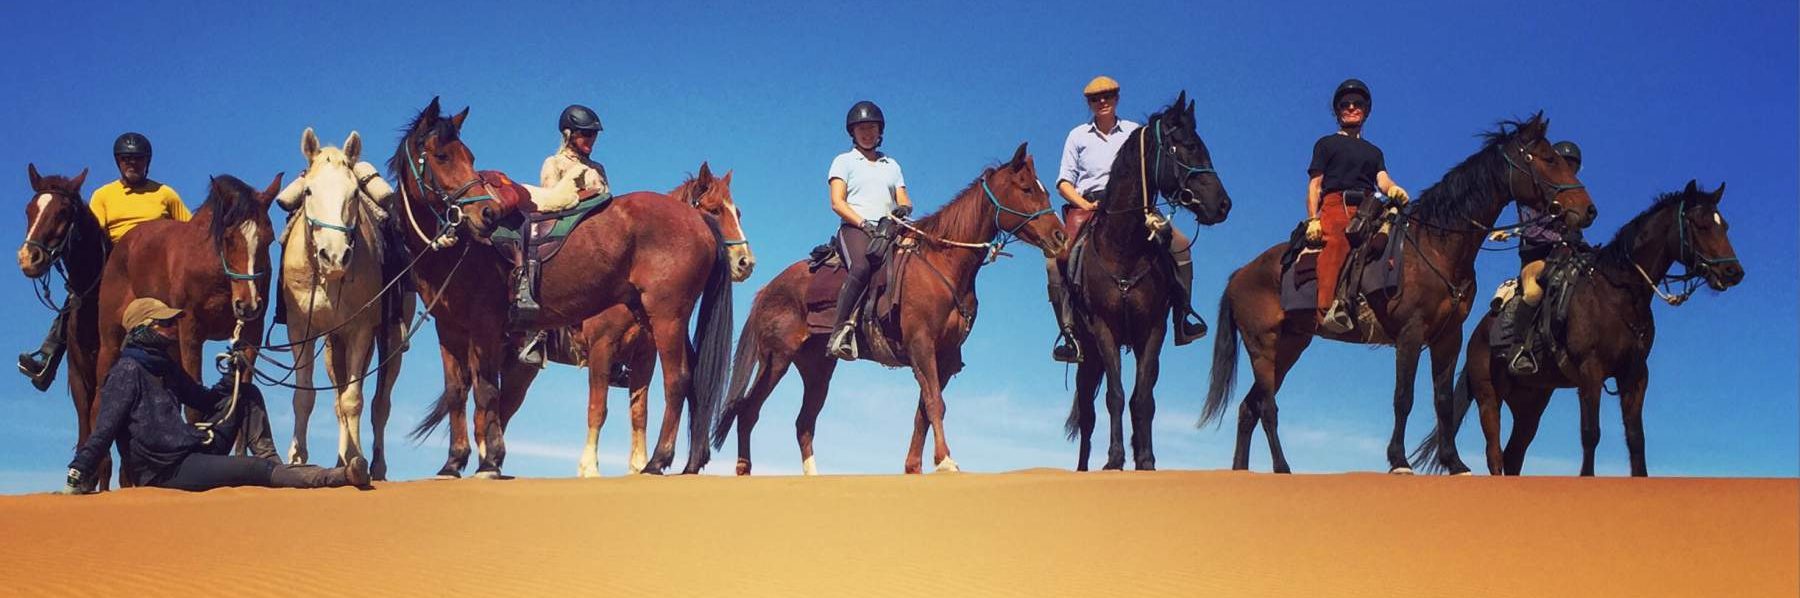 horse riding in namibia